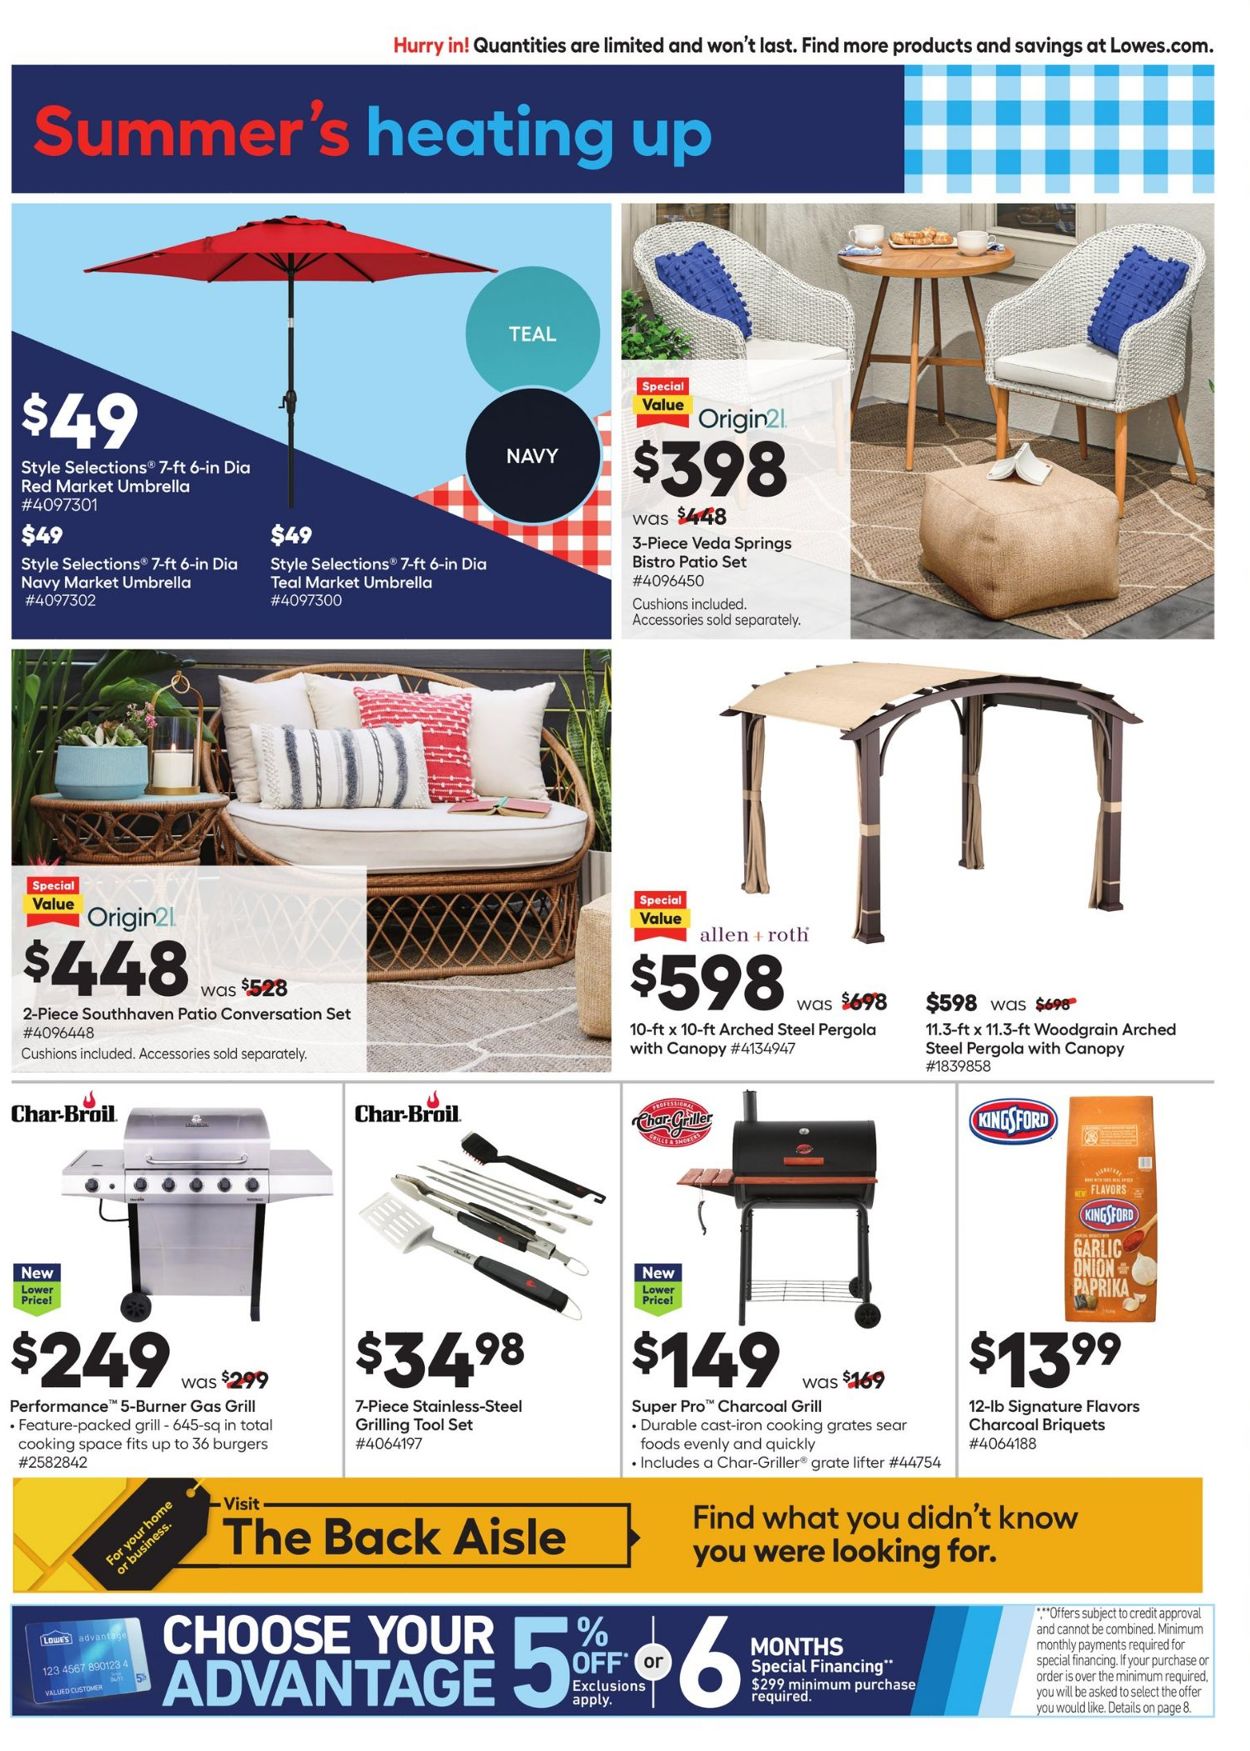 Lowe's Current weekly ad 05/19 - 05/25/2022 [3] - frequent-ads.com